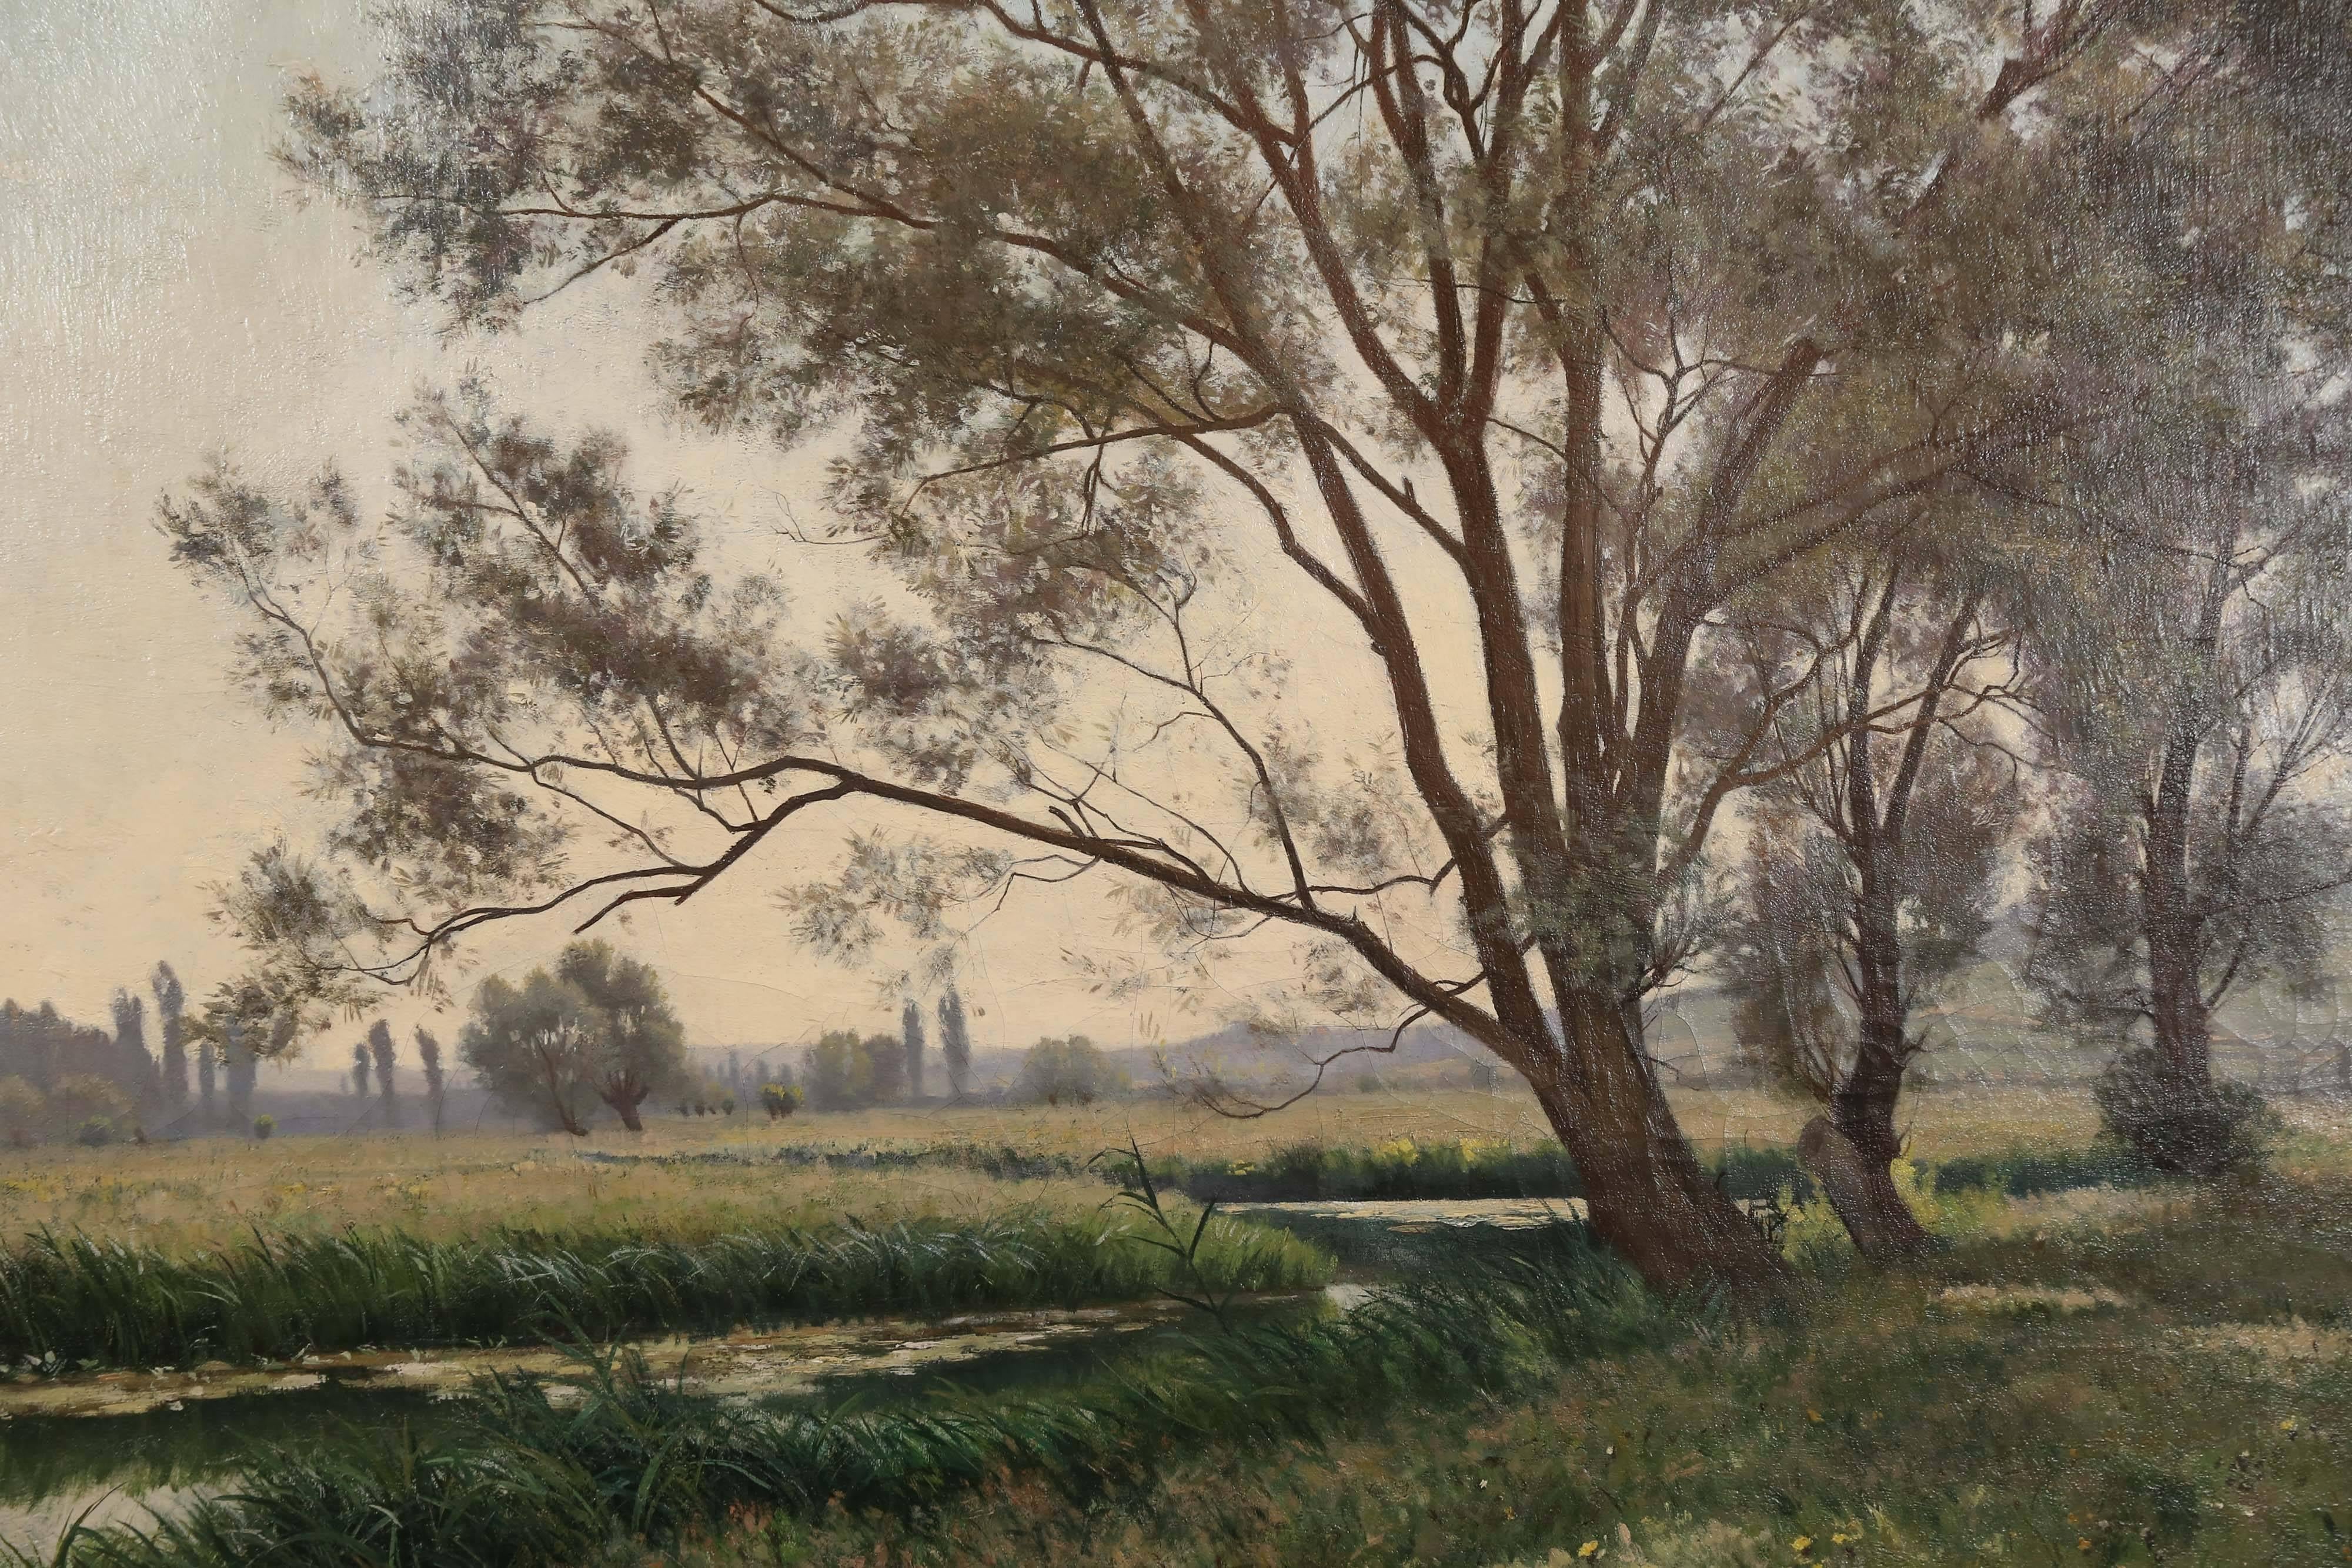 Lovely landscape with trees on a creek in the foreground.
The background features.

A landscape painter, Vaysee studied under Hector Pron and Pierre Jeanniot.
He as a member of the Societaire de Artistes Francais and began exhibiting at this